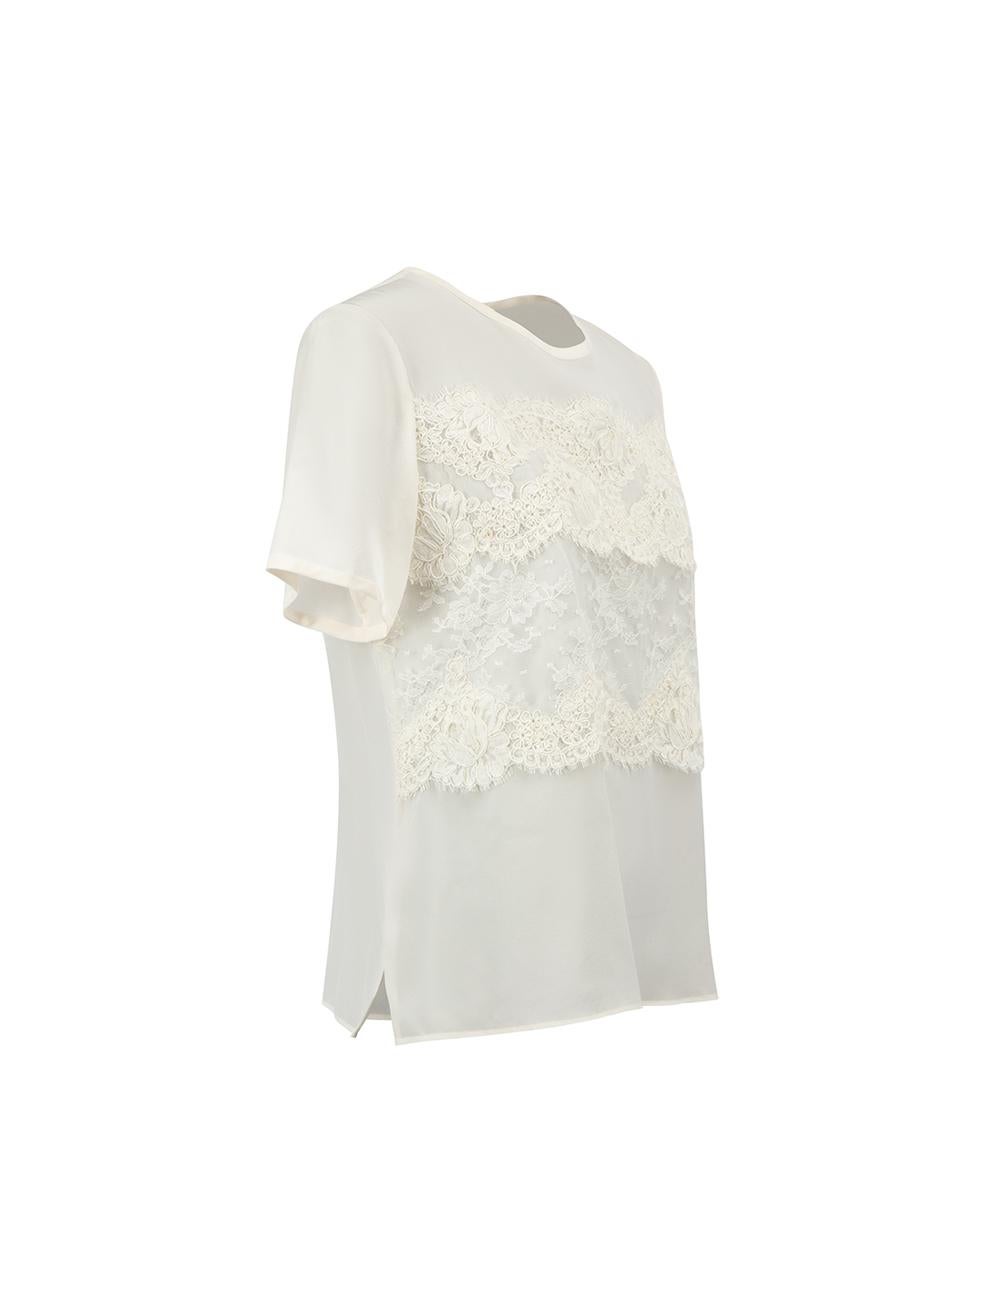 CONDITION is Good. Minor wear to blouse is evident. Light wear to fabric with small mark at centre front and small marks on lace overlay of this used Oscar de la Renta designer resale item. We recommend dry-cleaning this item before